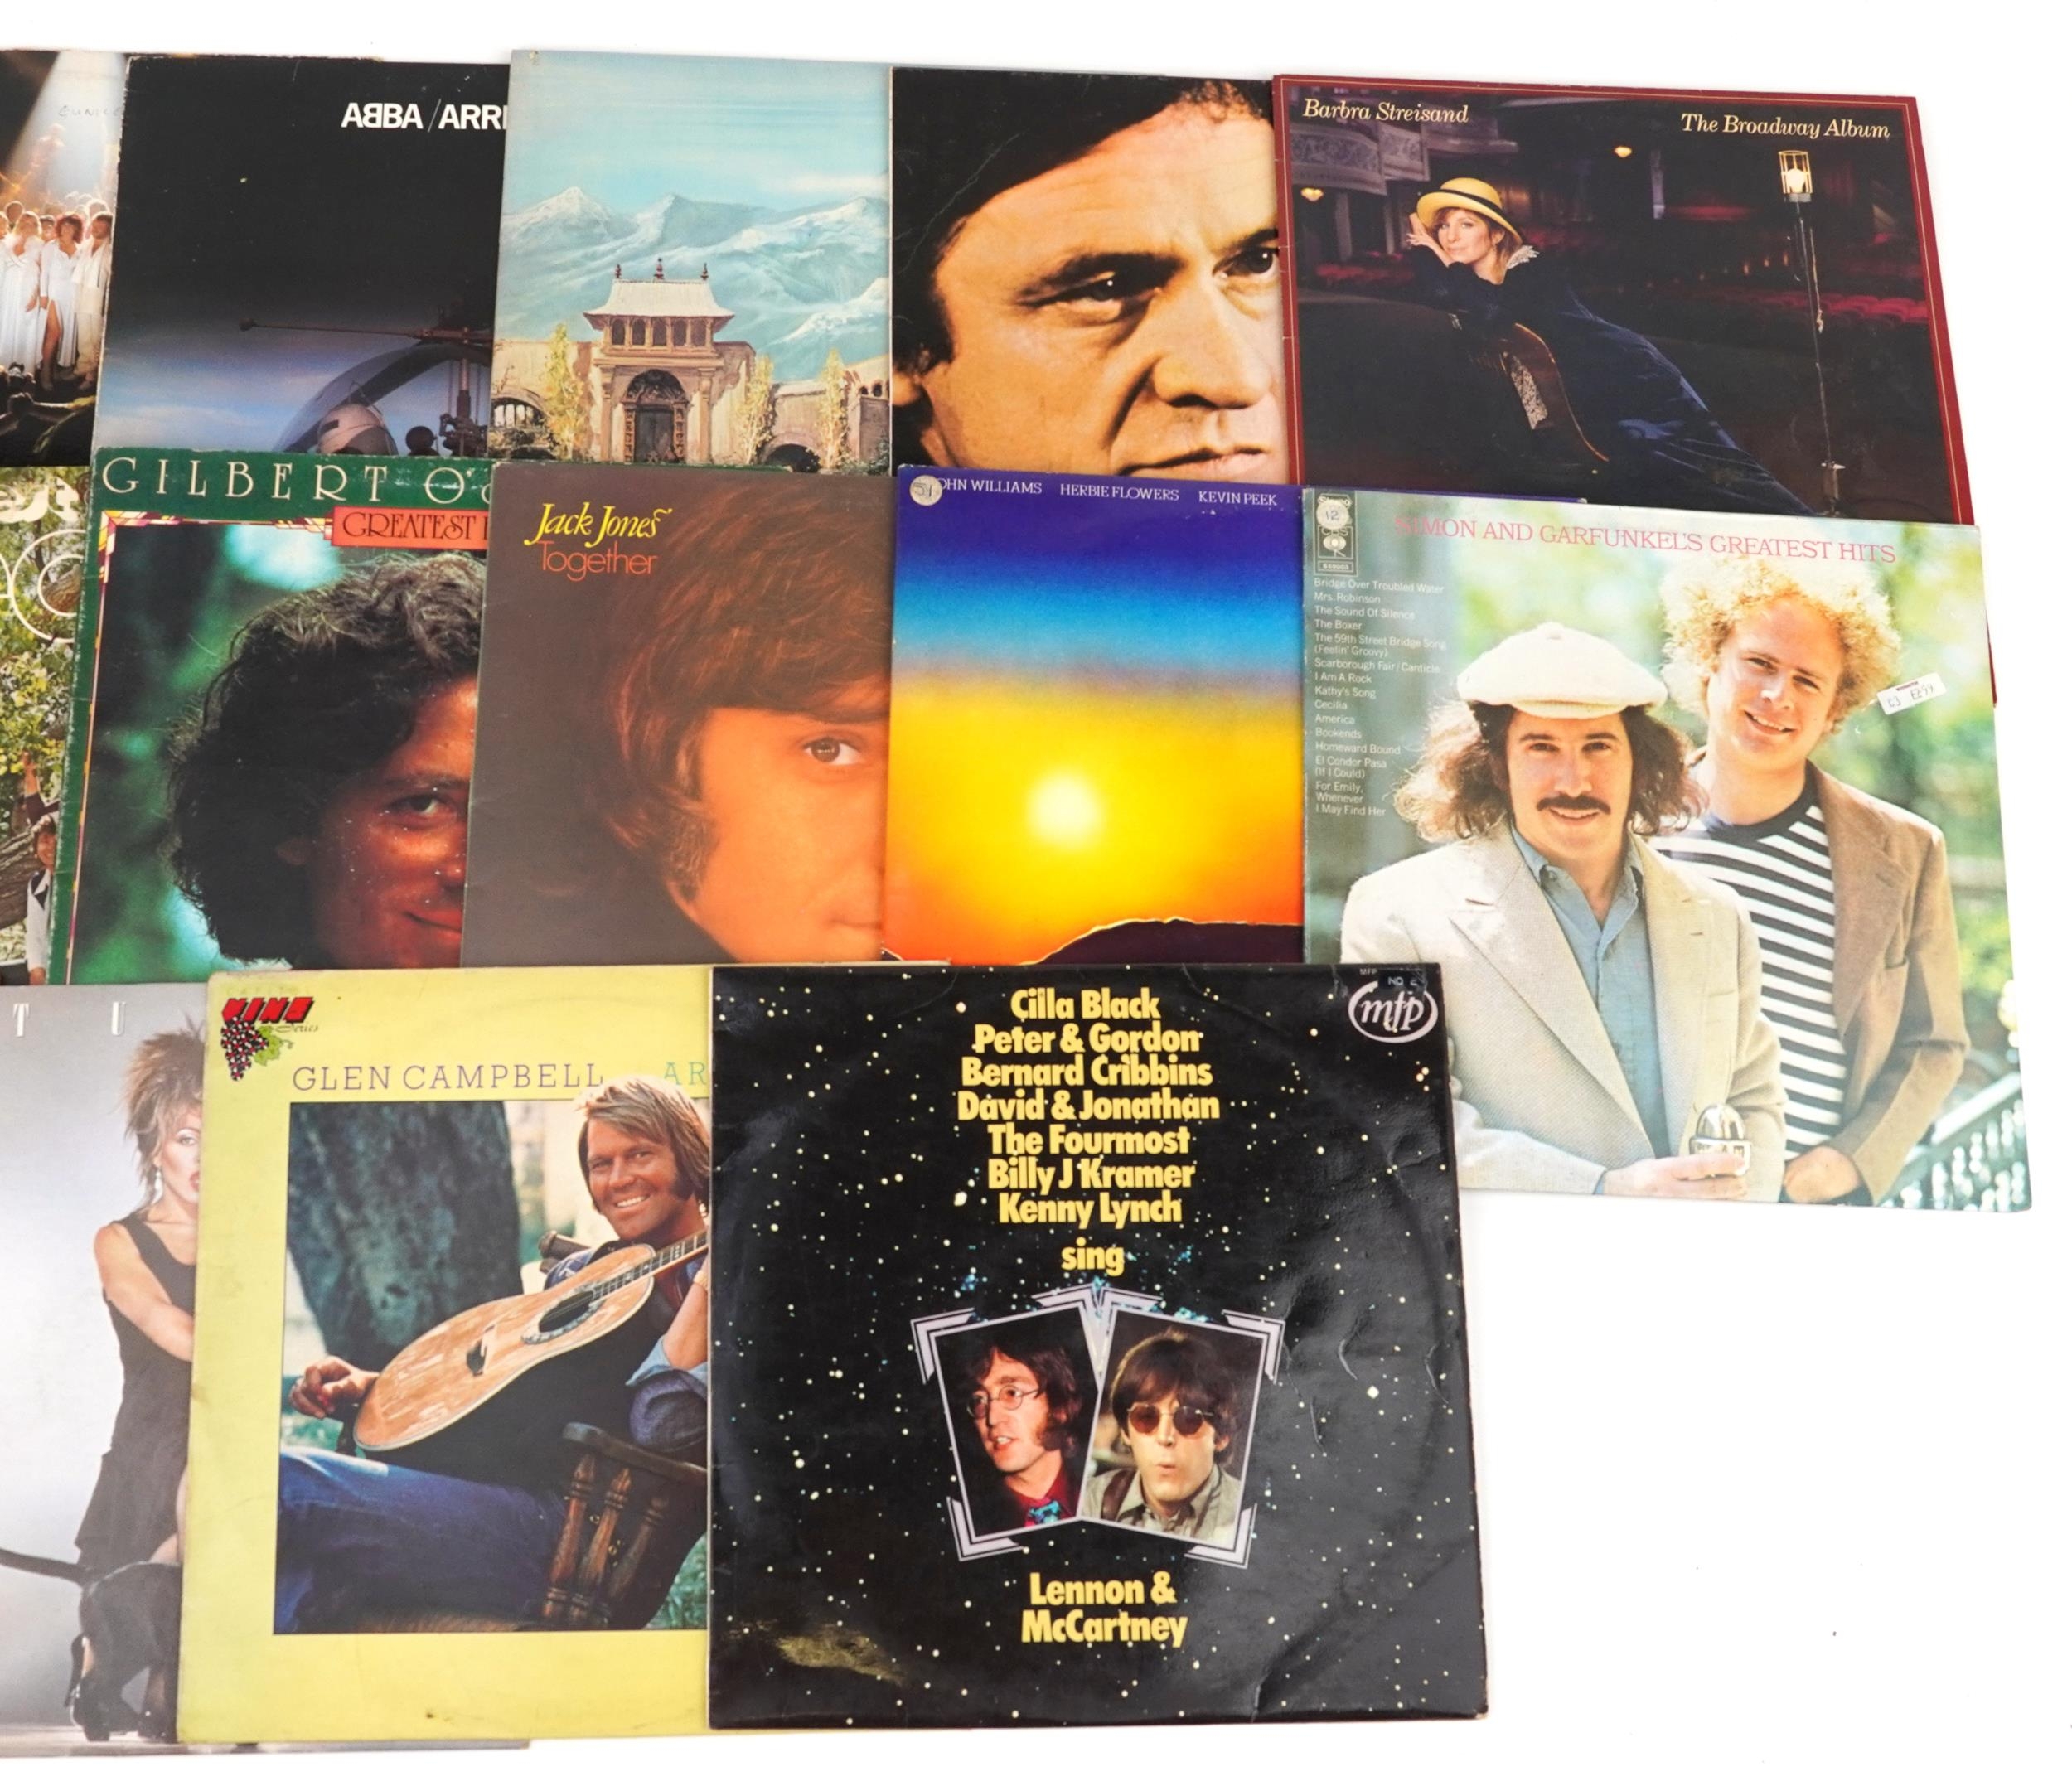 Vinyl LP records including Barbara Streisand, ABBA and Cilla Black - Image 3 of 3